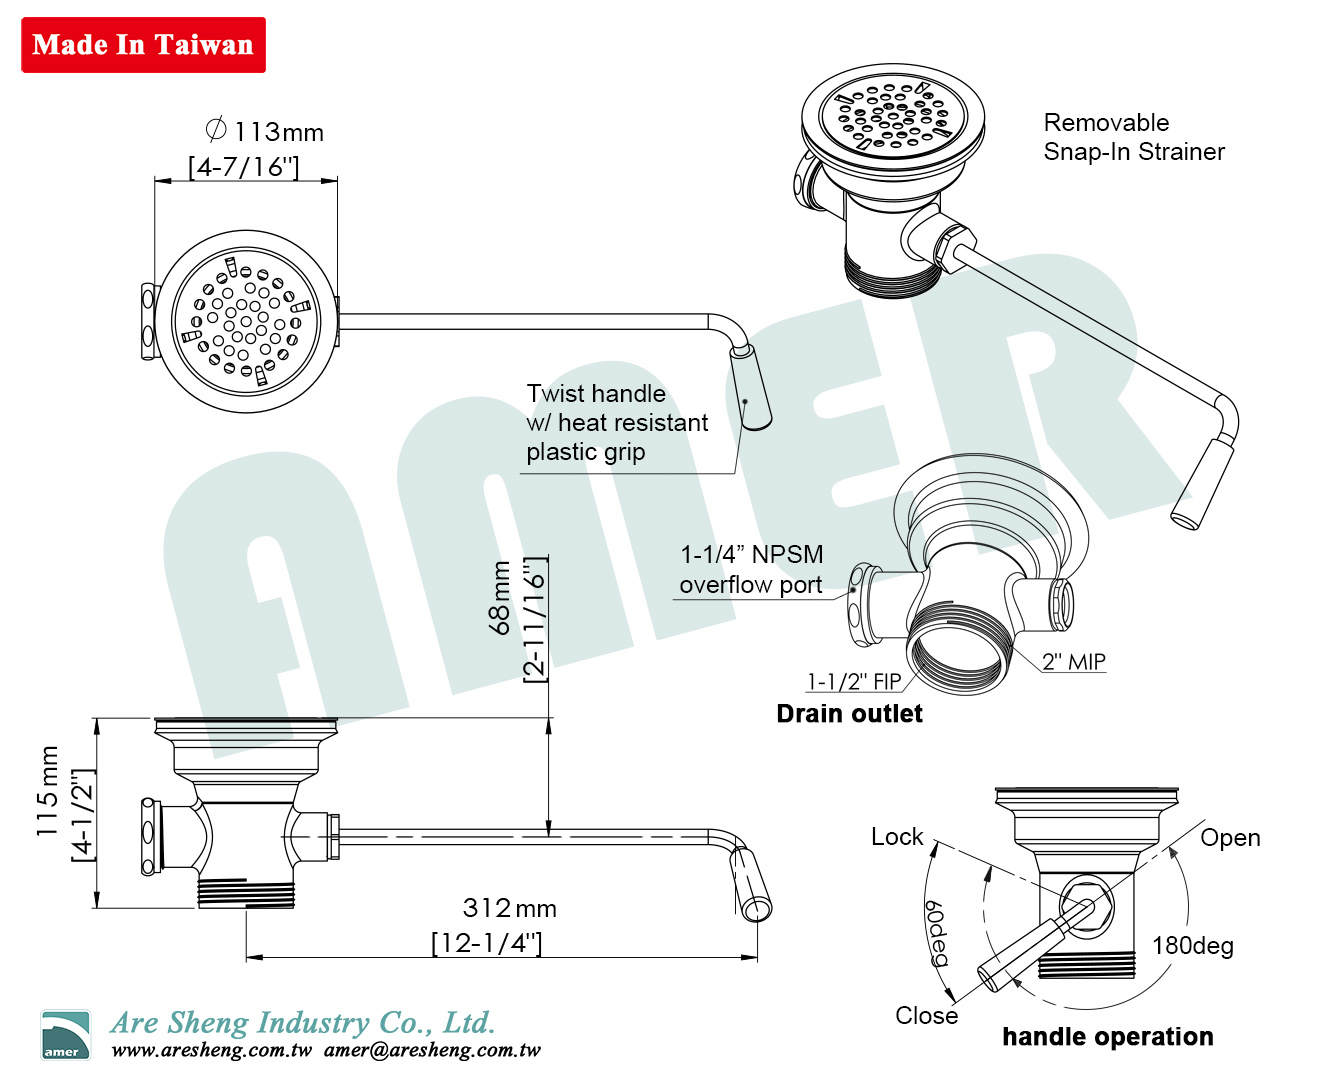 D79-007-dimension drawing of waste valve -twist handle